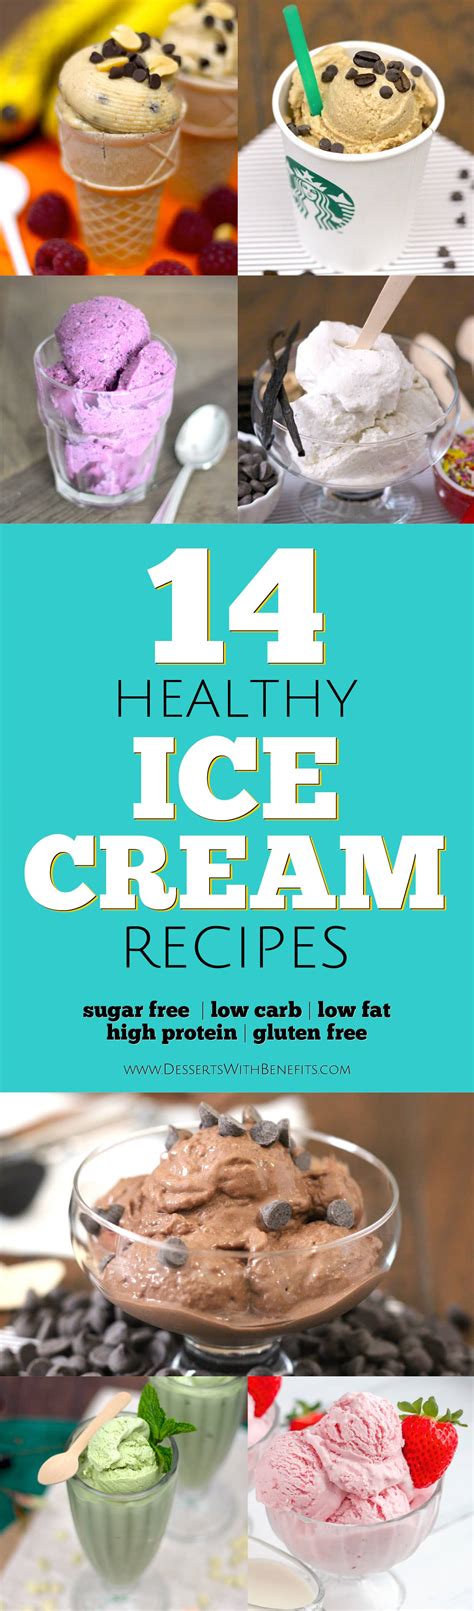 It only has a half cup of real maple syrup in 1 1/2 quarts of ice cream, so it's a natural sweetener, and. Healthy Ice Cream Recipes | Sugar Free, Low Carb, Low Fat ...